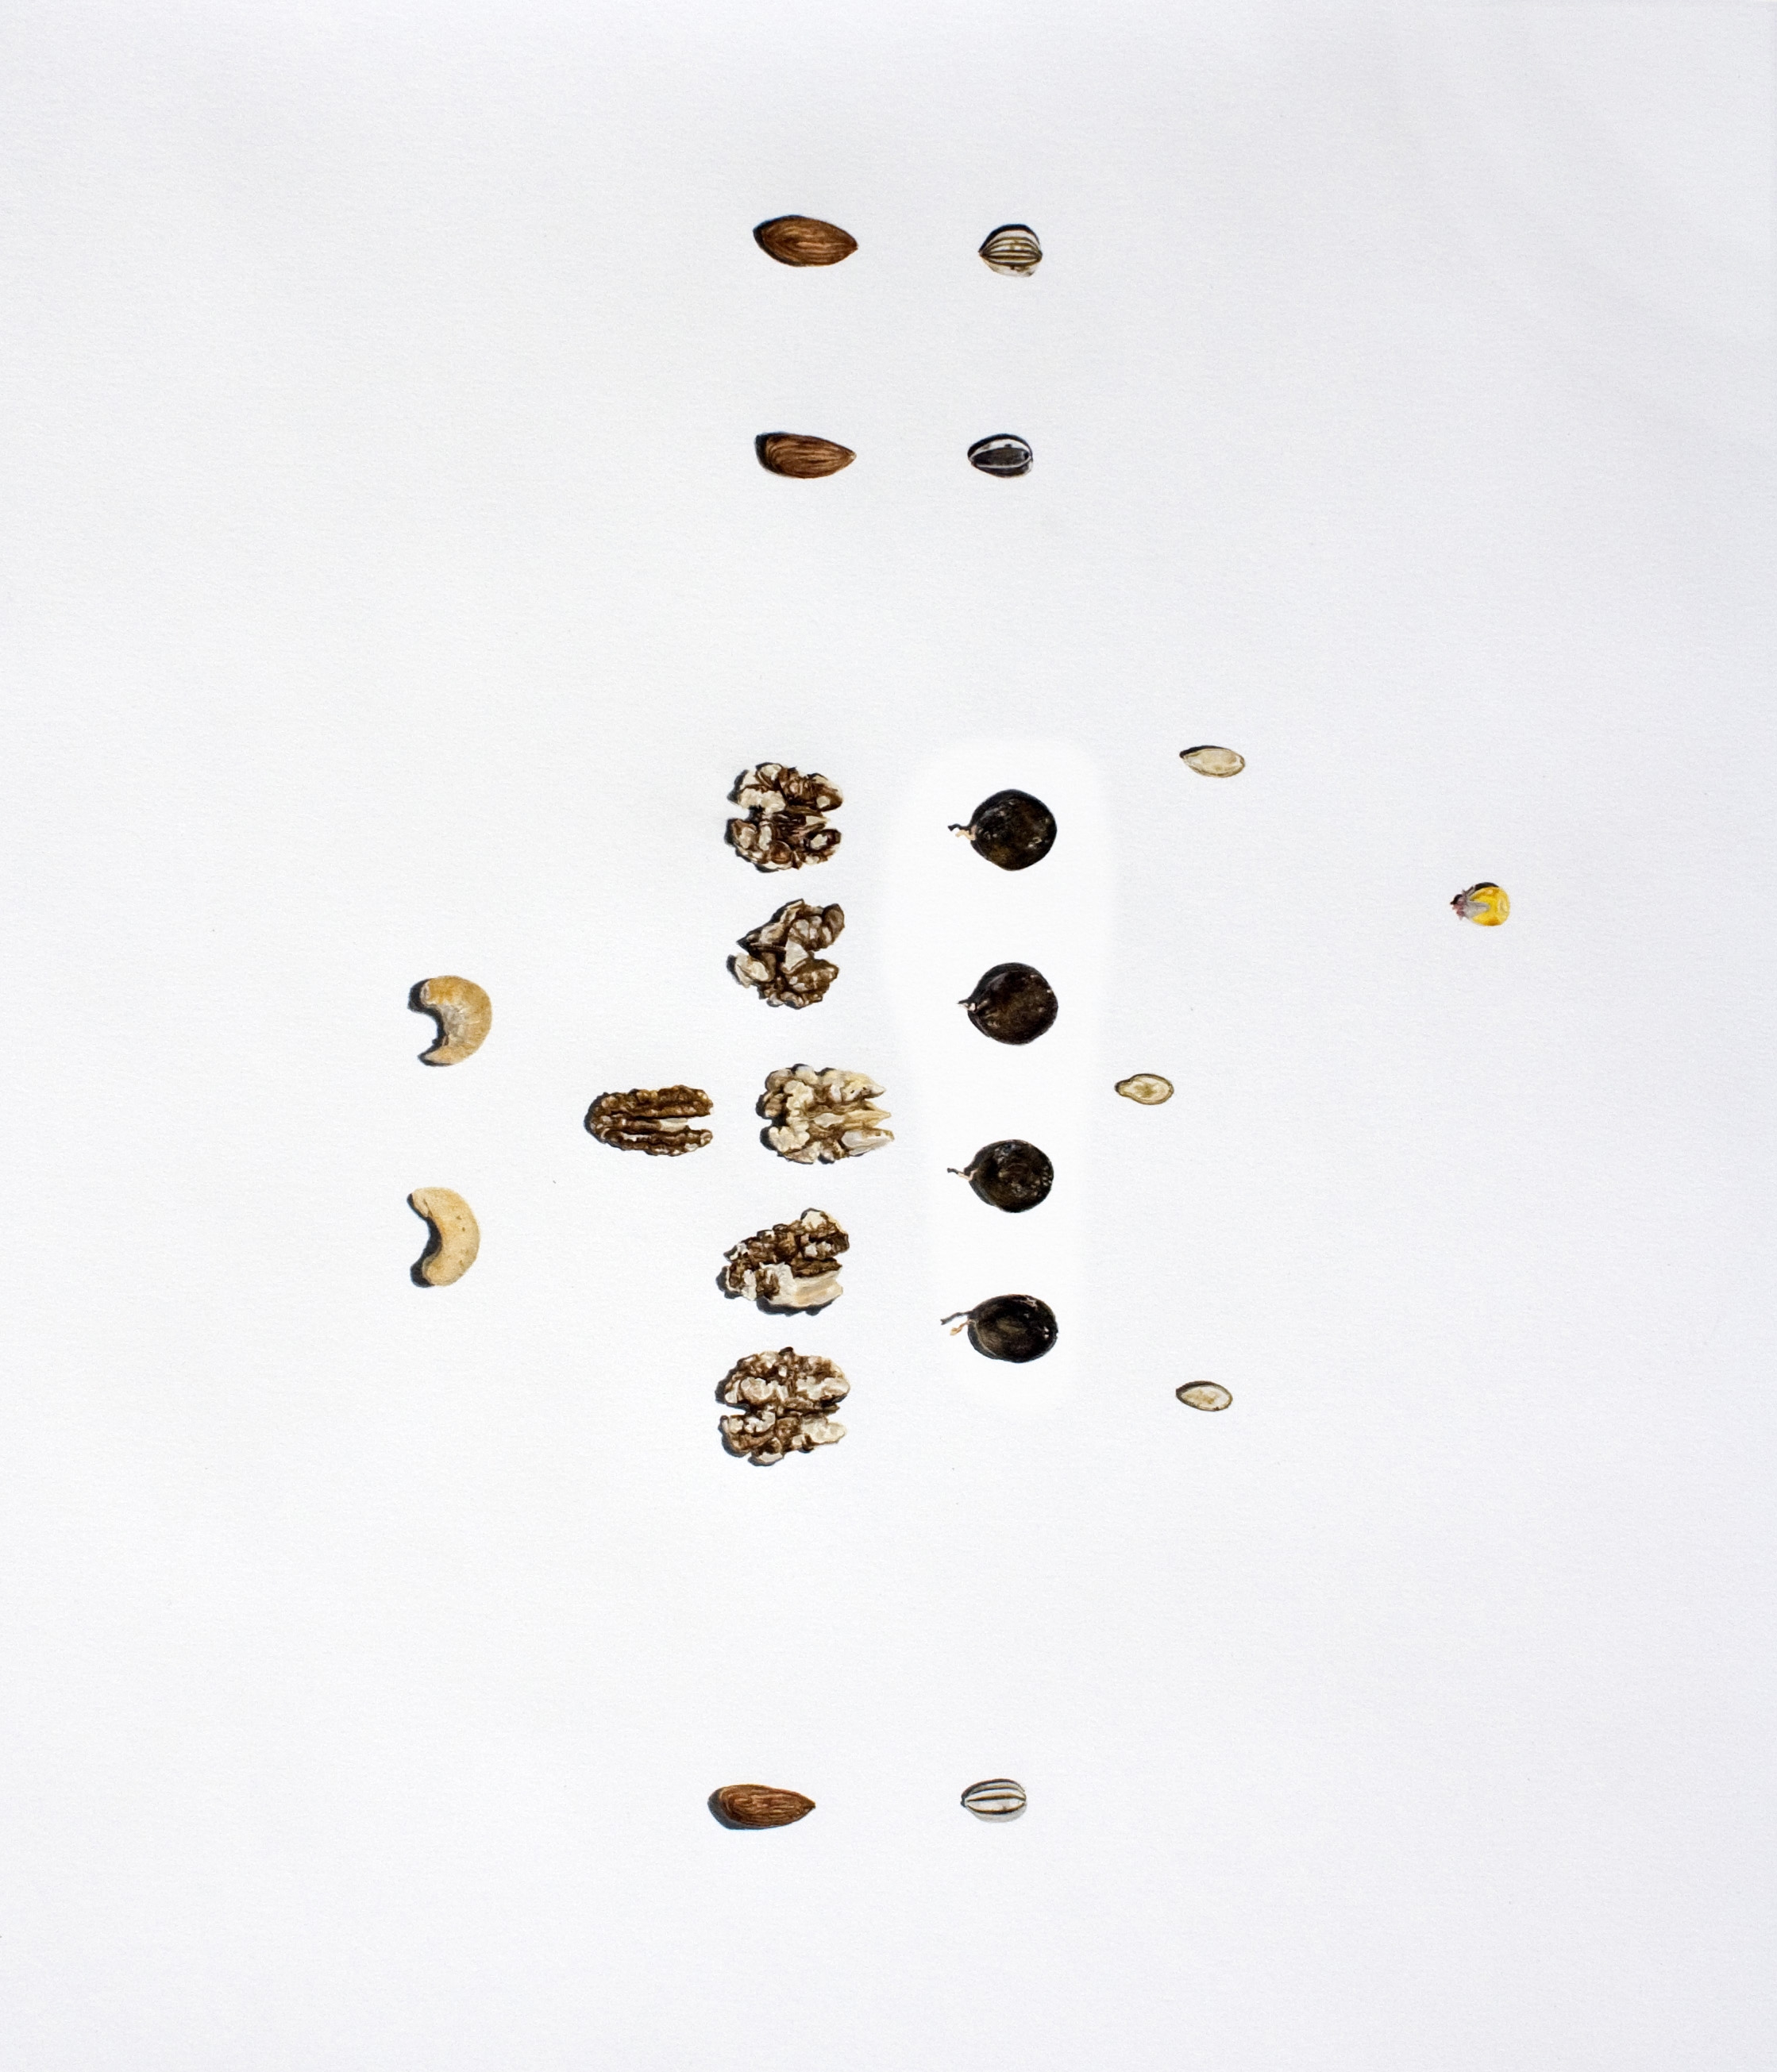 Nuts vs. Seeds (football formation)